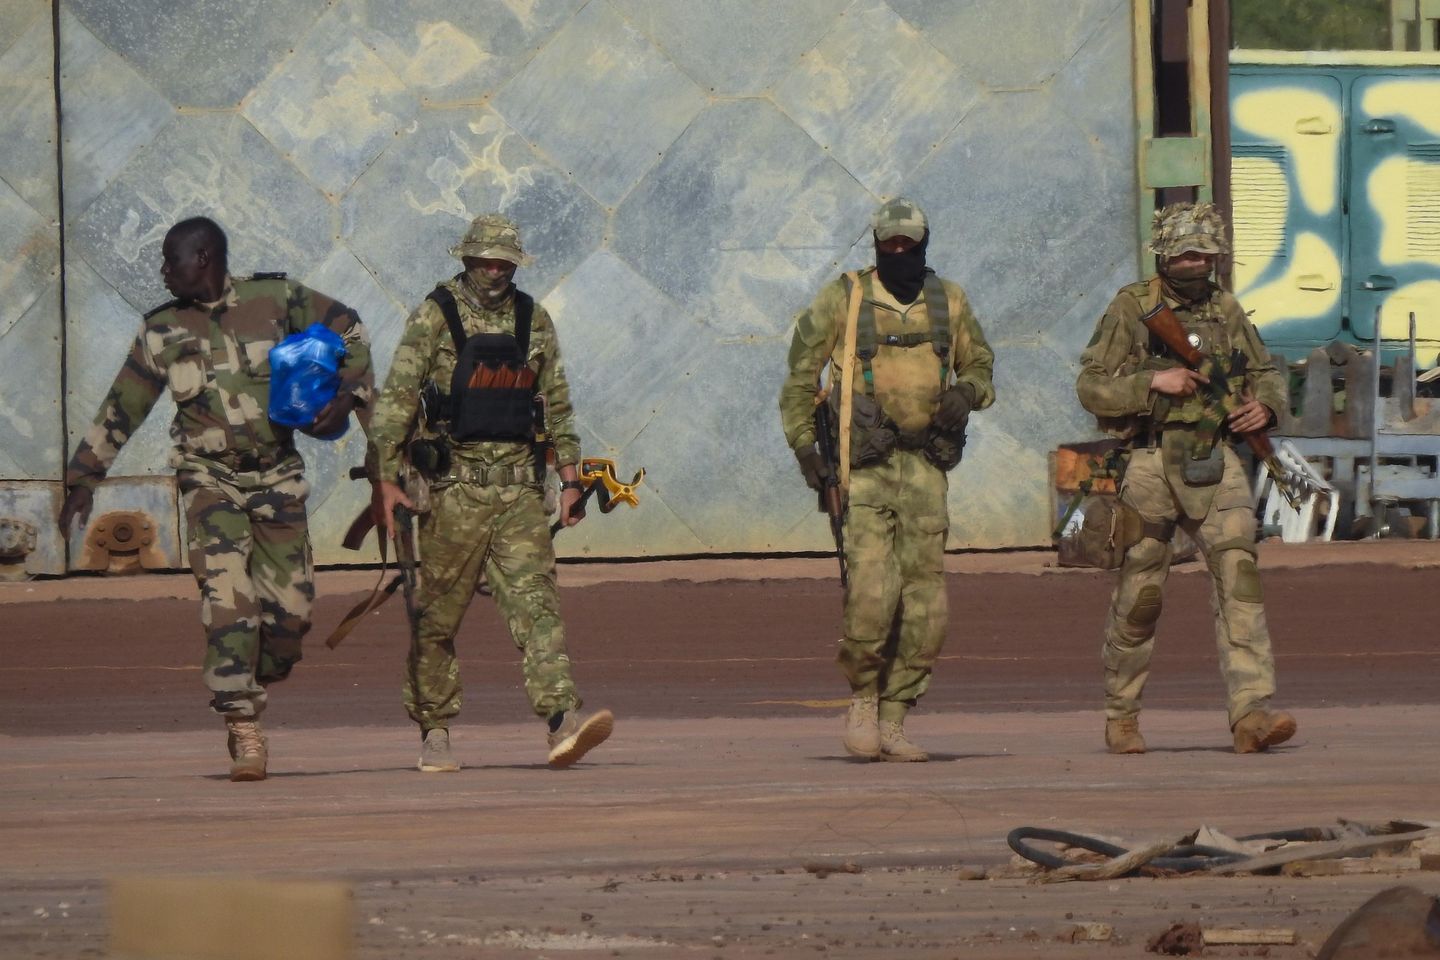 Russian Wagner Group fighters accused of abuses against civilians in Mali